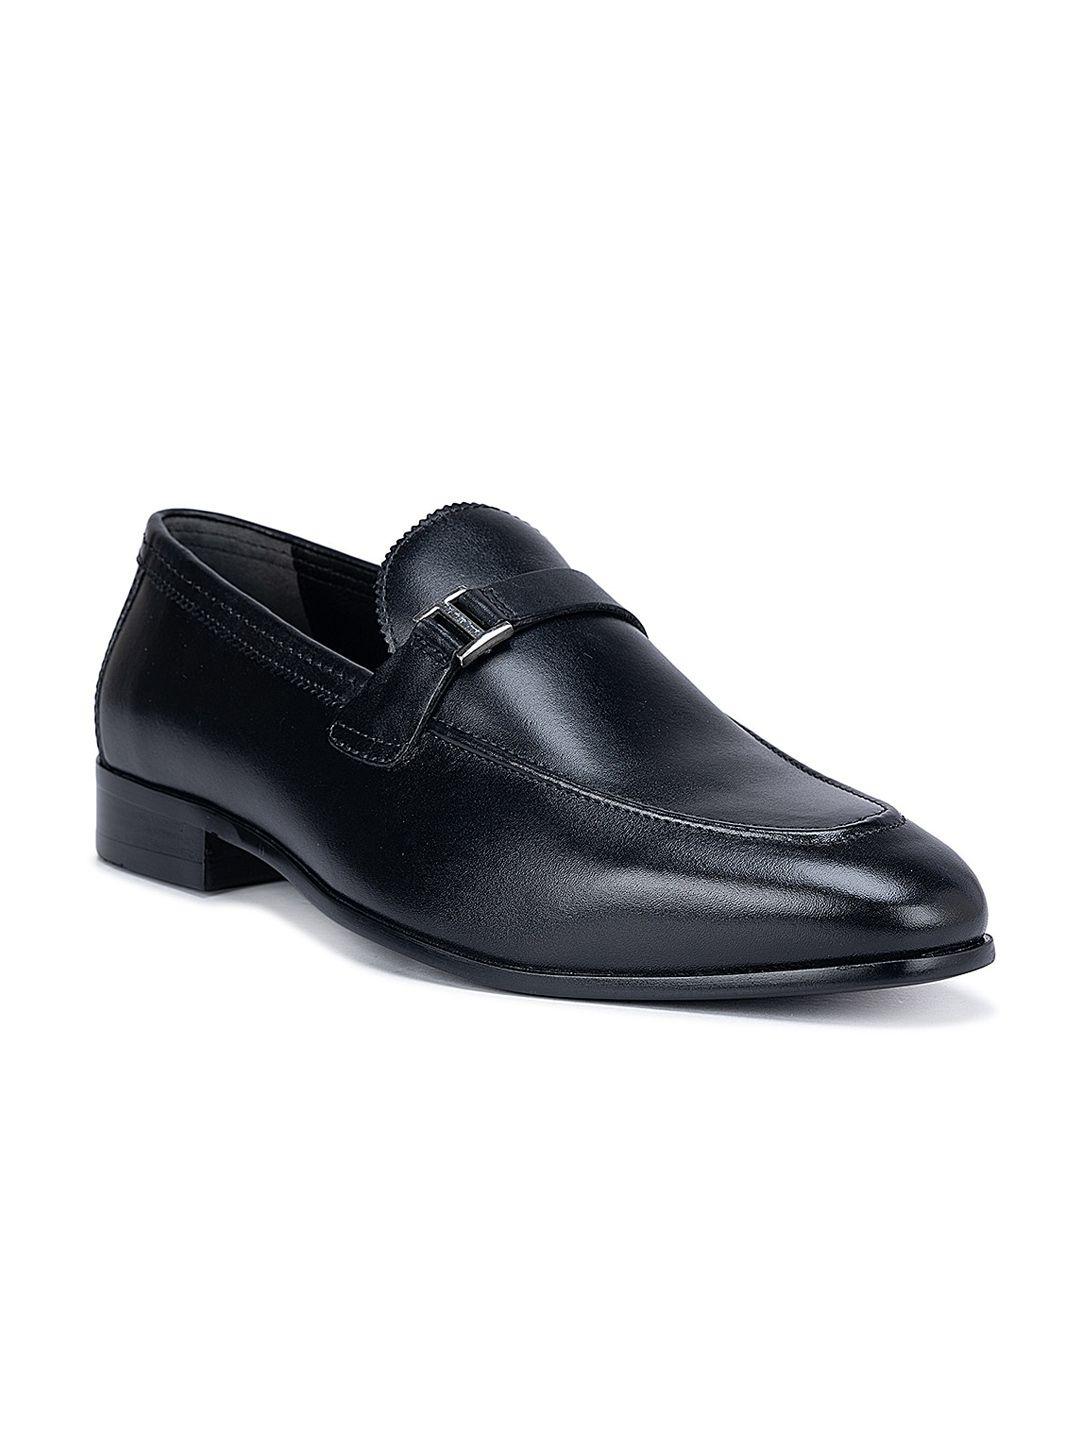 rosso-brunello-men-textured-leather-formal-slip-on-shoes